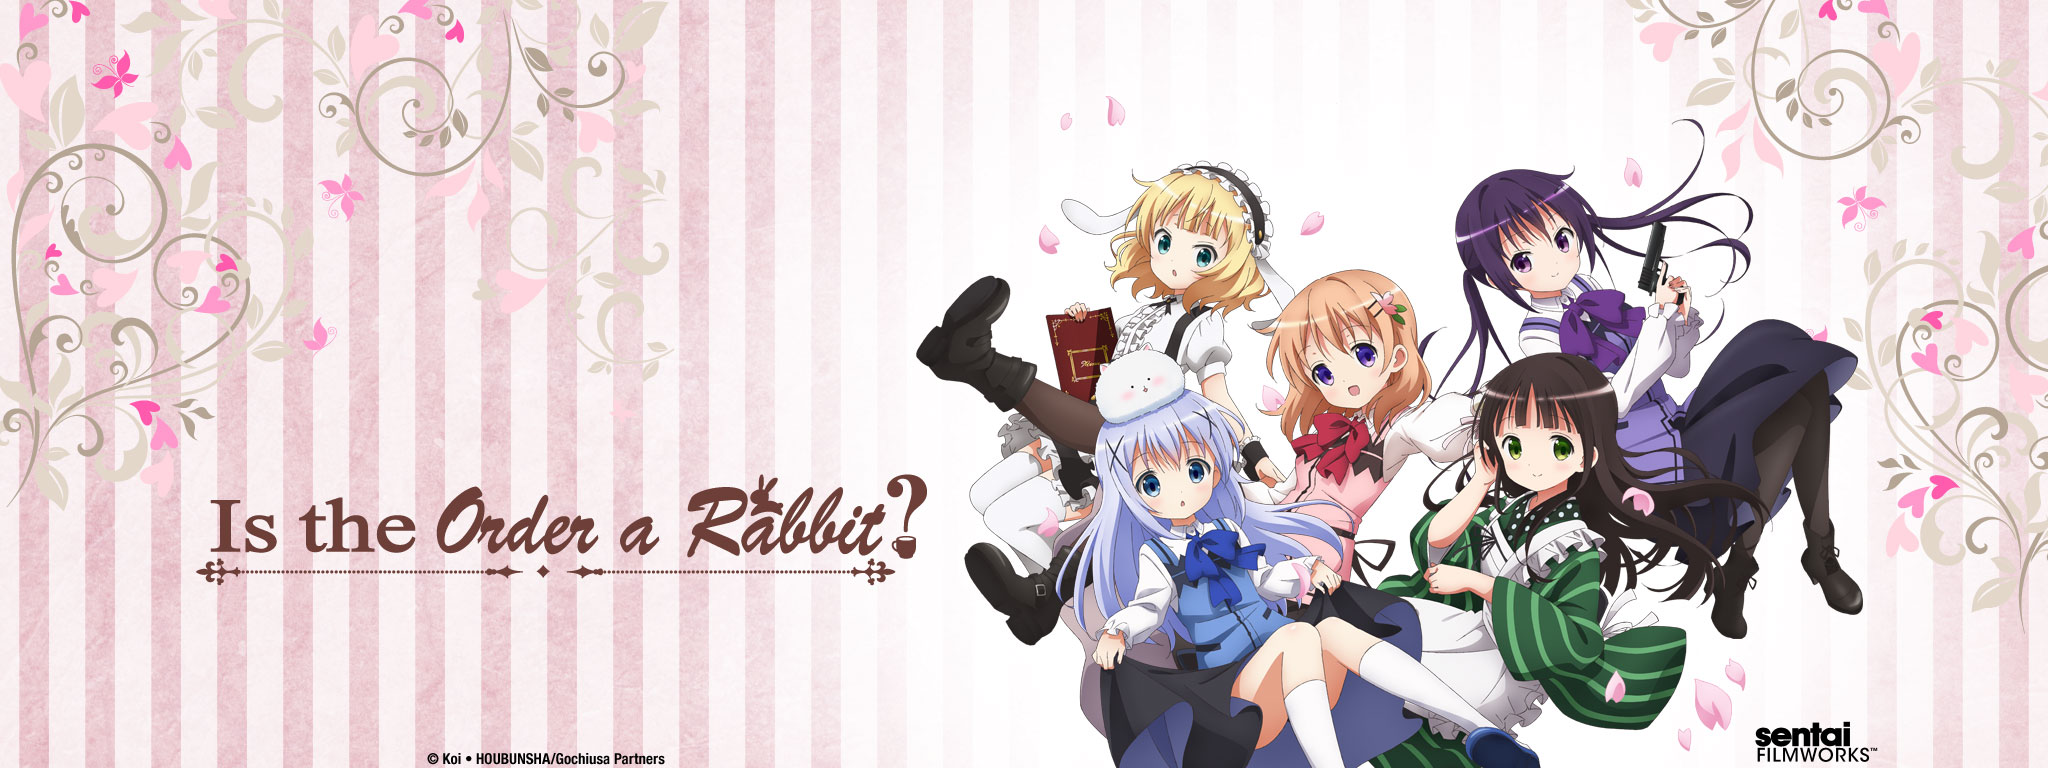 Title Art for Is the Order a Rabbit?